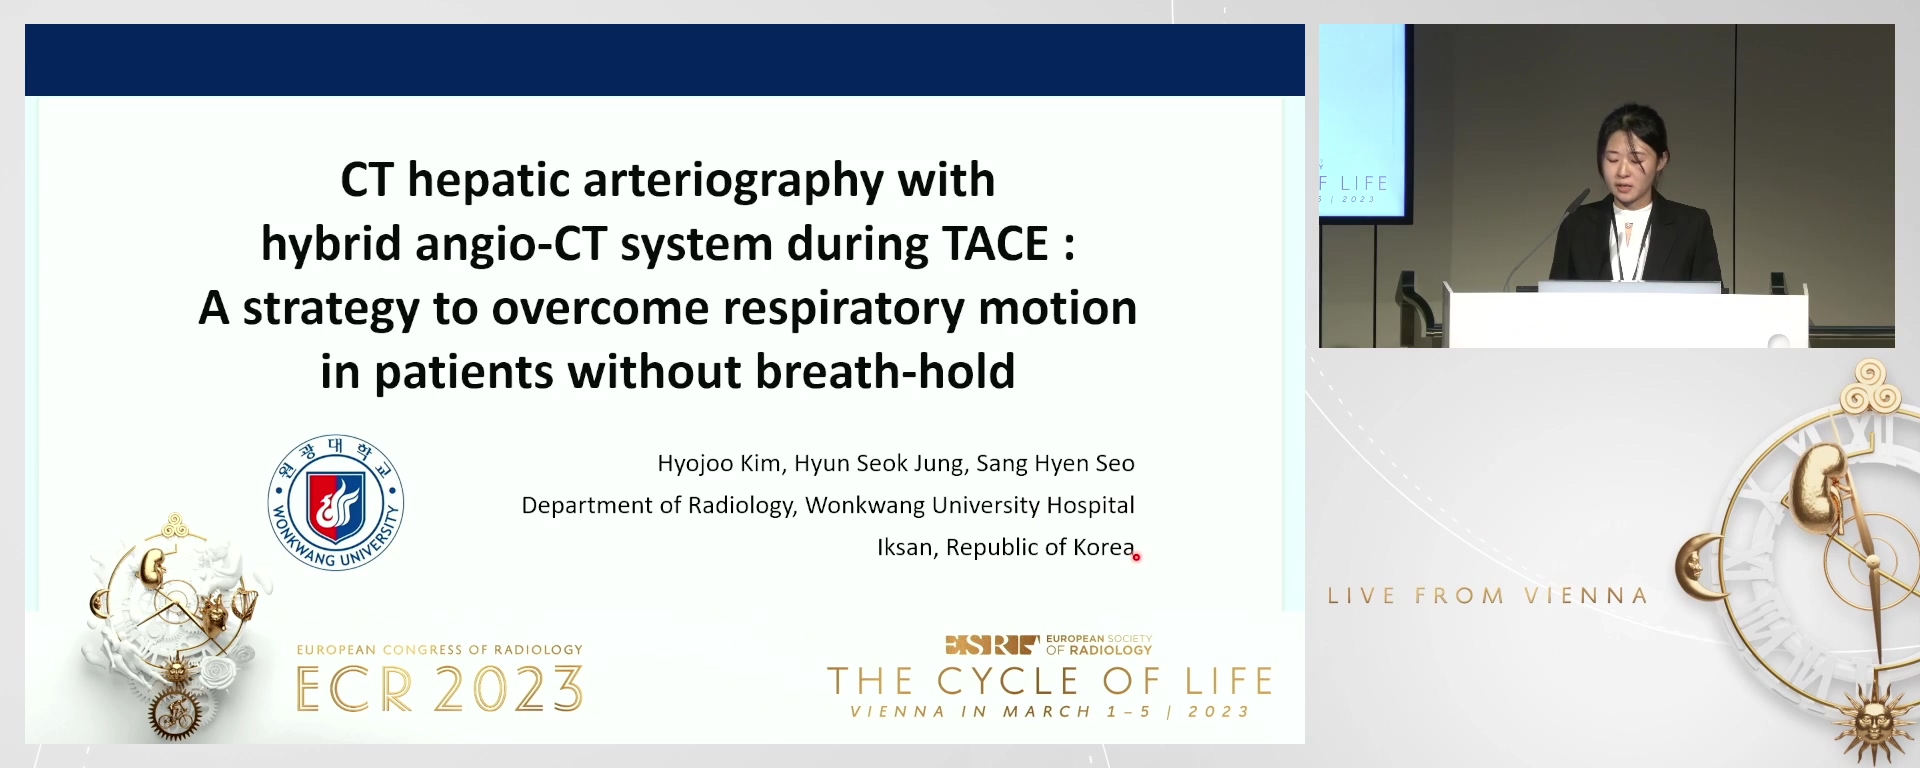 CT hepatic arteriography with hybrid angio-CT system during TACE: a strategy to overcome respiratory motion in patients without breath-hold